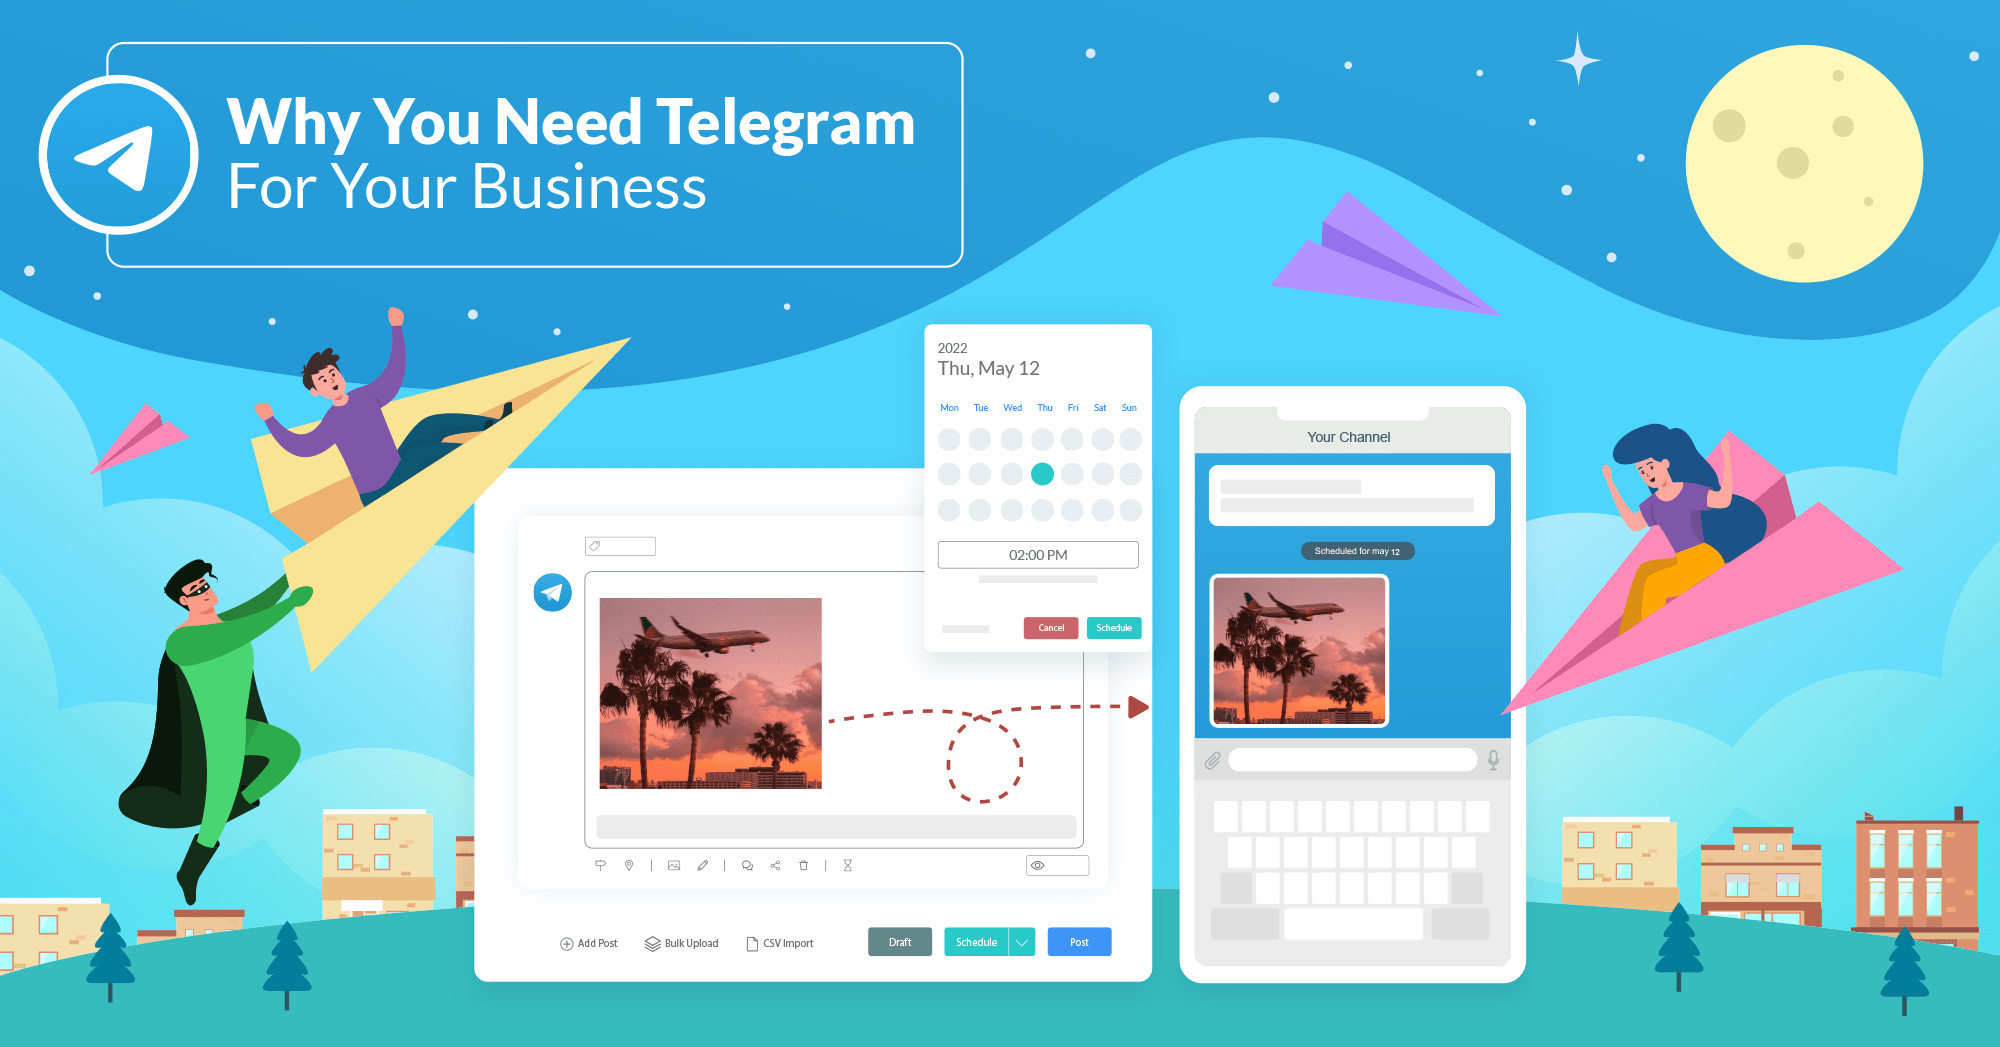 Why You Need Telegram For Your Business